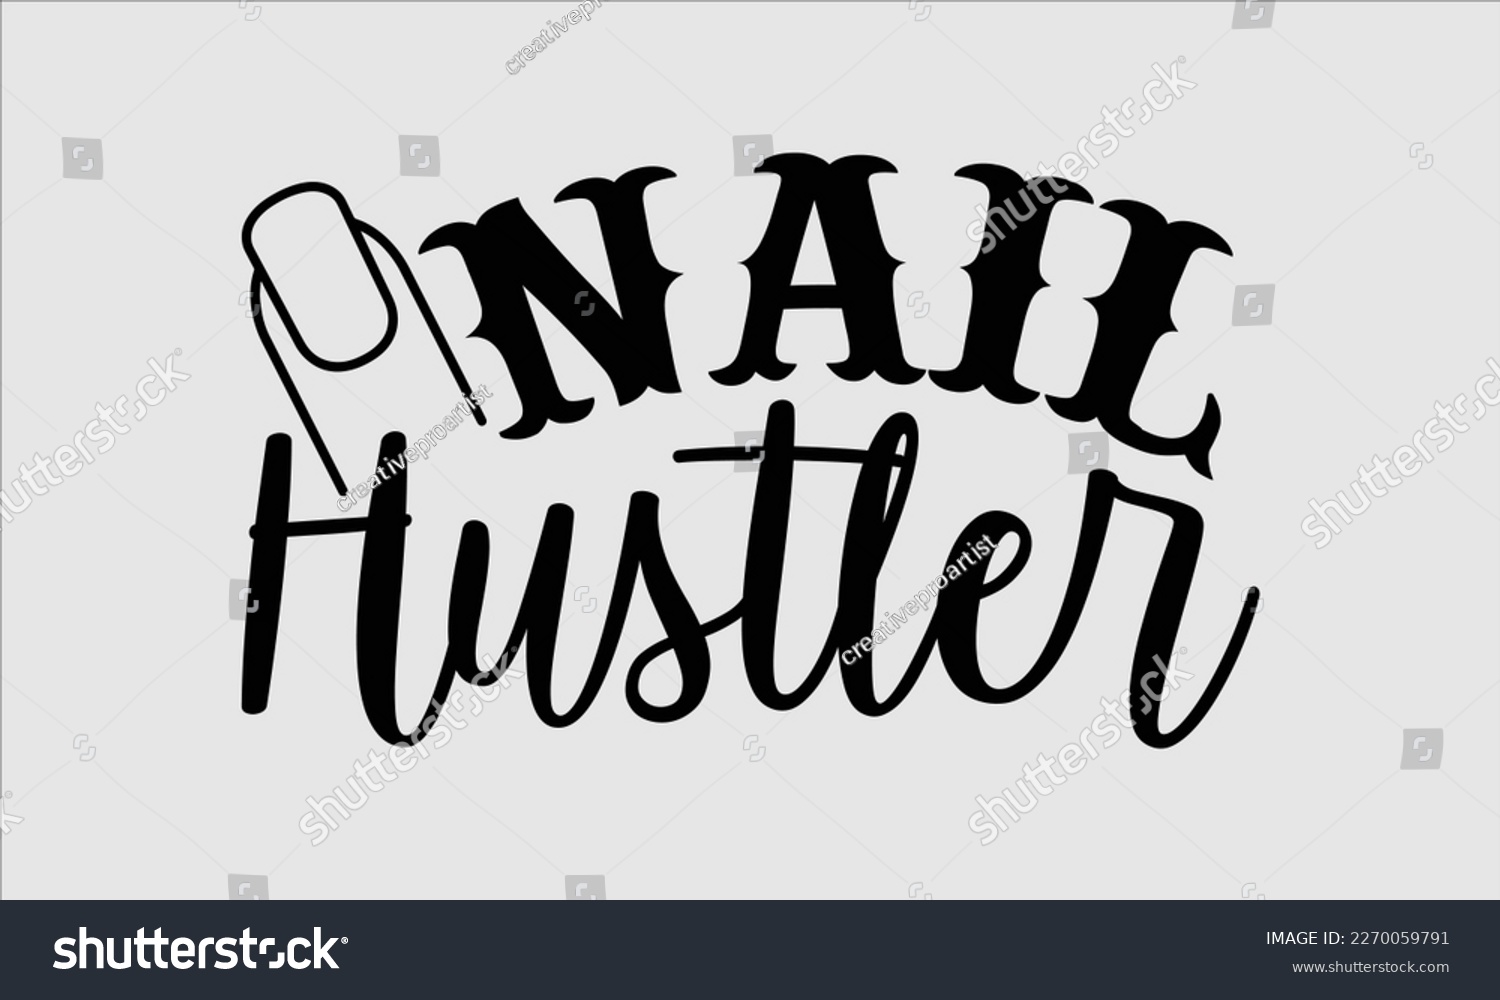 SVG of Nail hustler- Nail Tech t shirts design, Hand written lettering phrase, Isolated on white background,  Calligraphy graphic for Cutting Machine, svg eps 10. svg